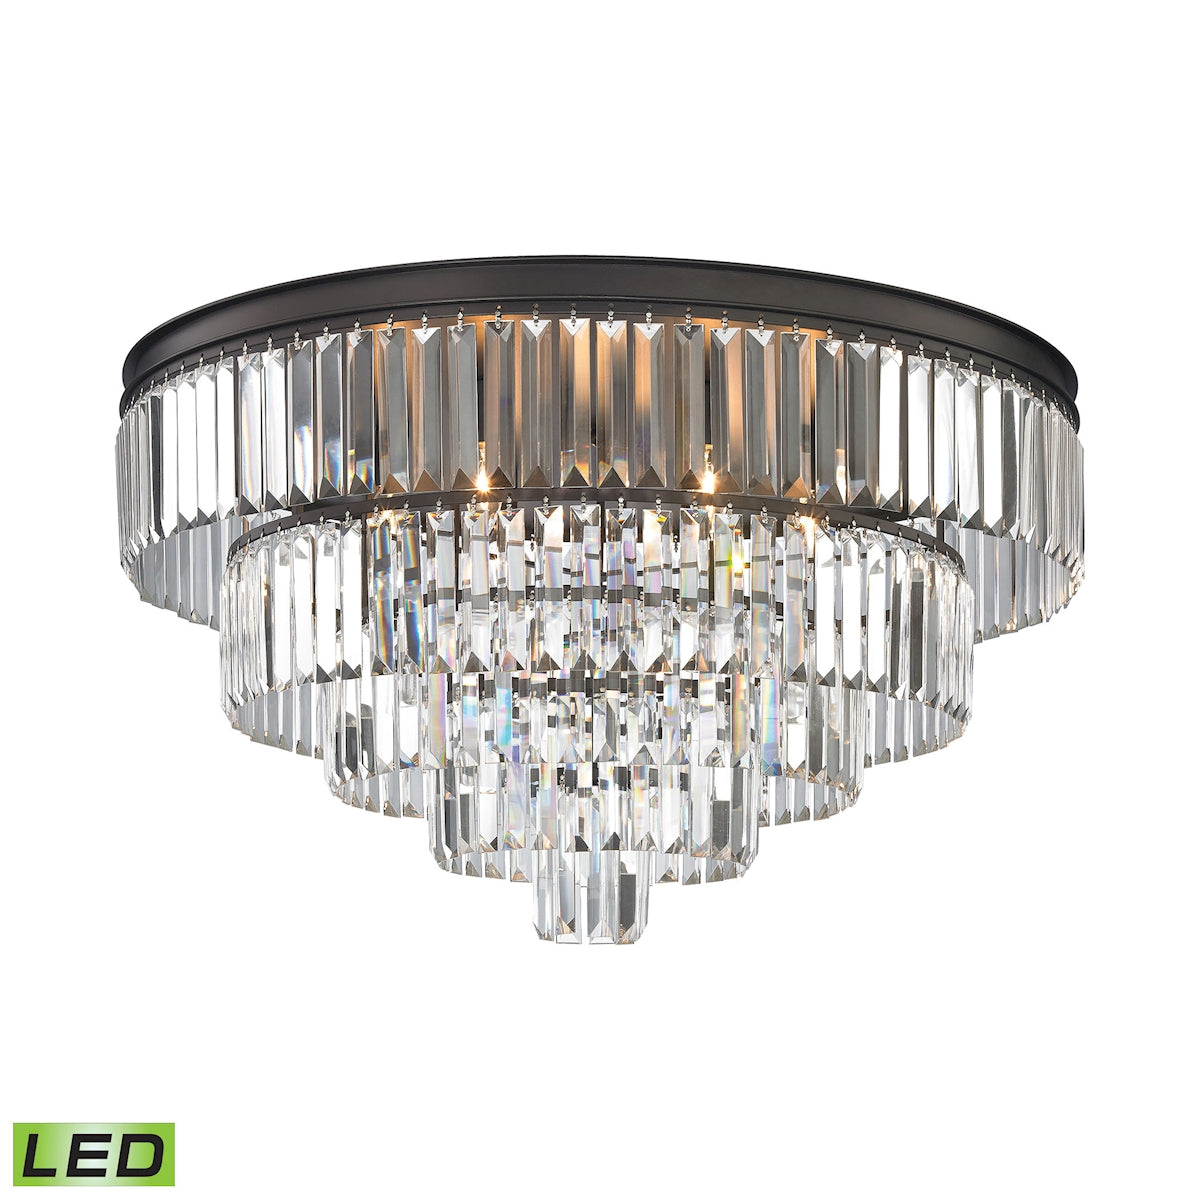 ELK Lighting 15226/6-LED Palacial 6-Light Chandelier in Oil Rubbed Bronze with Clear Crystal - Includes LED Bulbs